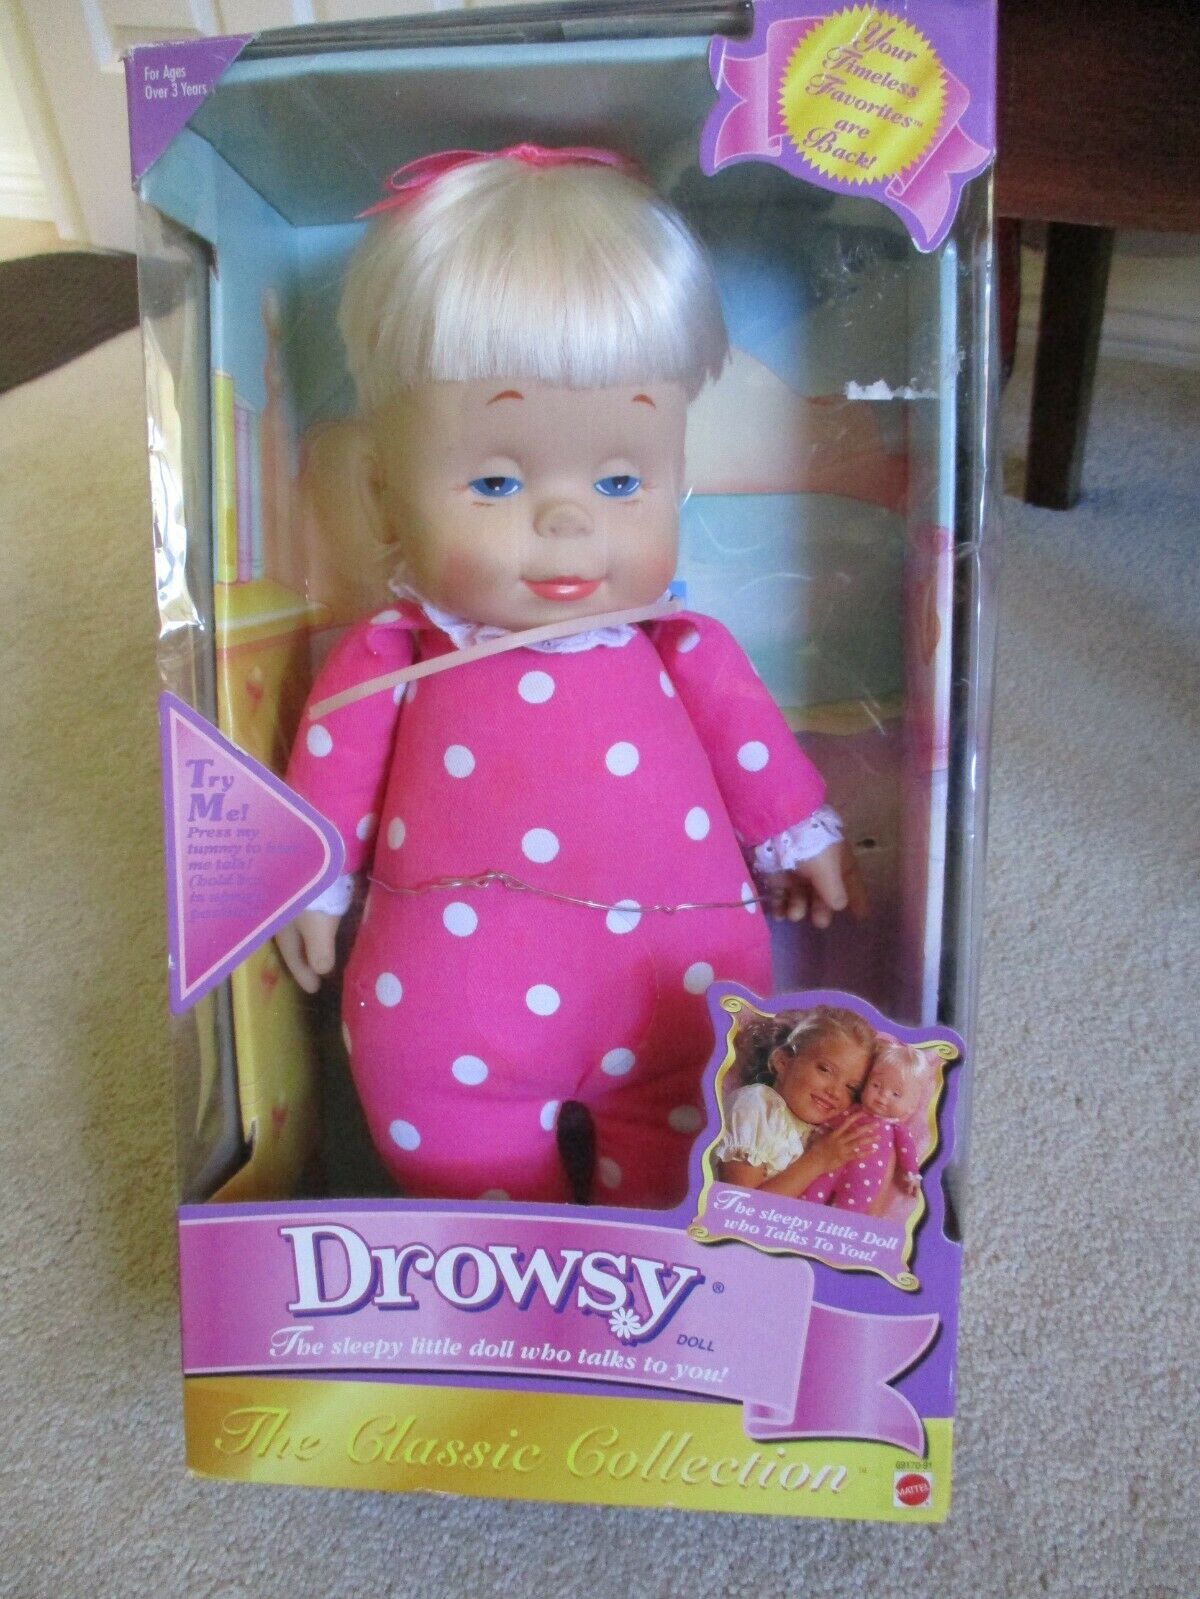 Vtg New In Box! Drowsy Talking Doll Mattel 15" Classic Collection, She Talks!